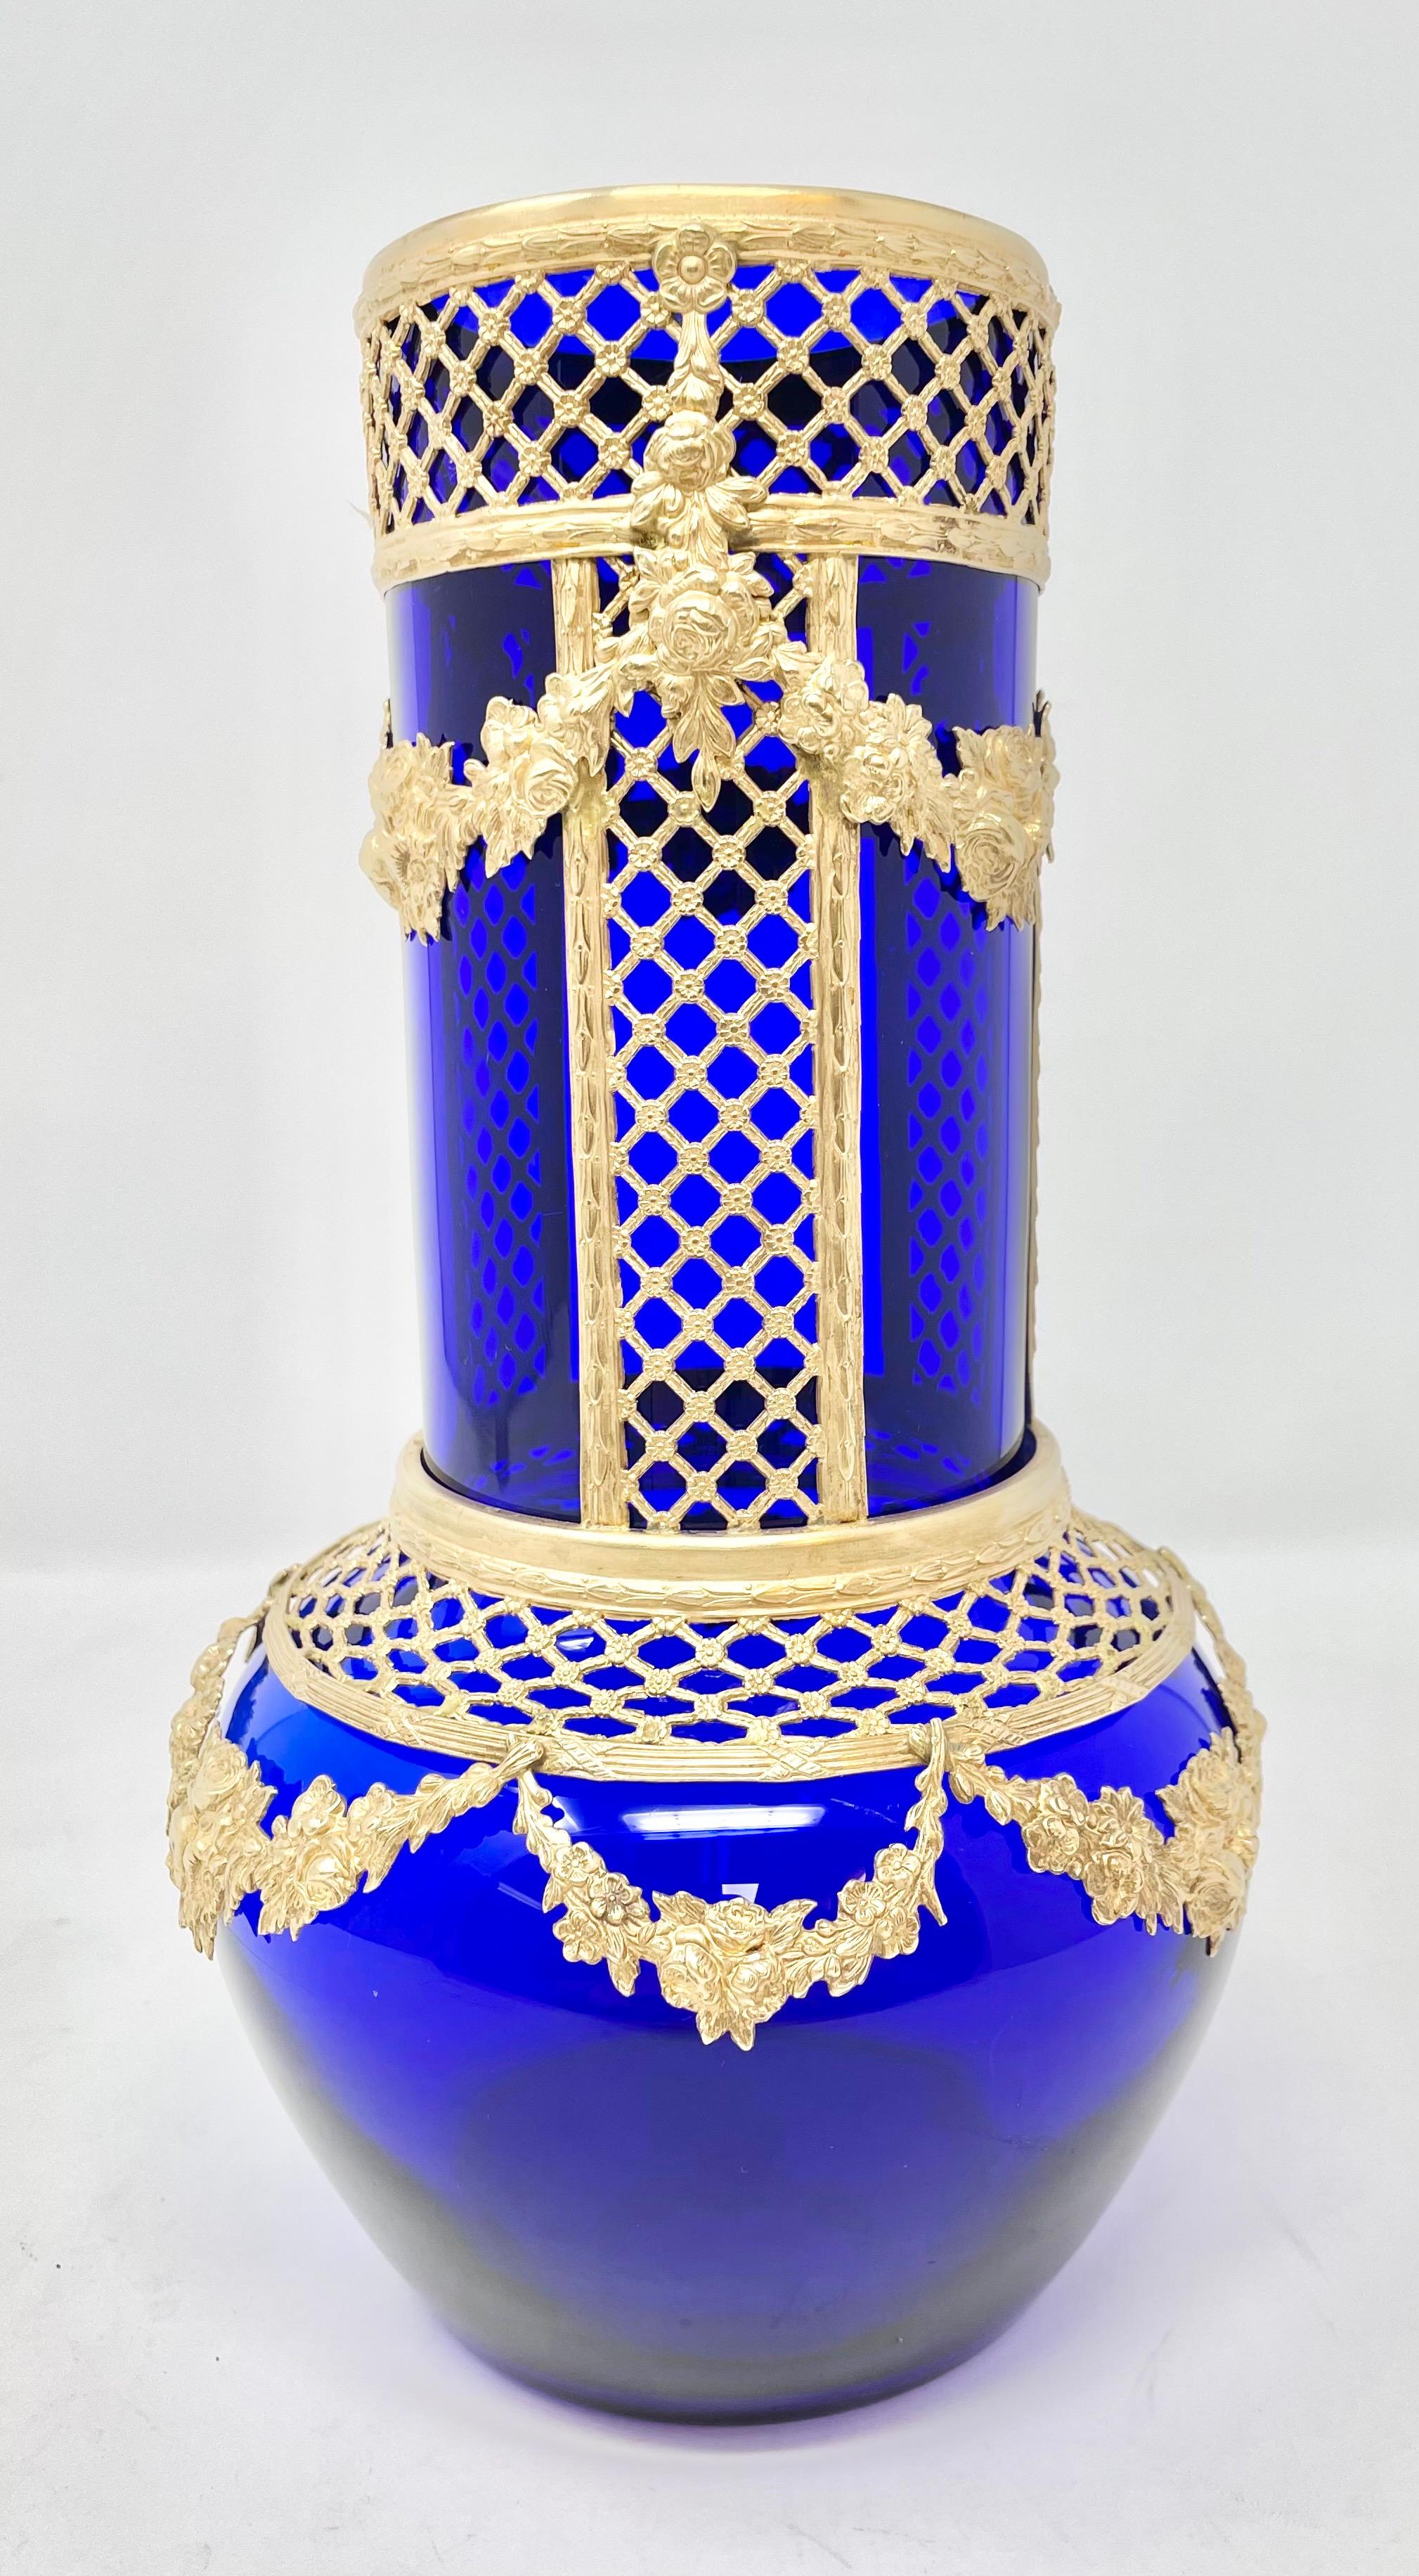 Fine Antique French Empire cobalt blue glass & intricate gold bronze mounted vase, circa 1900.
Cobalt Glass has a beautiful glow in the light.